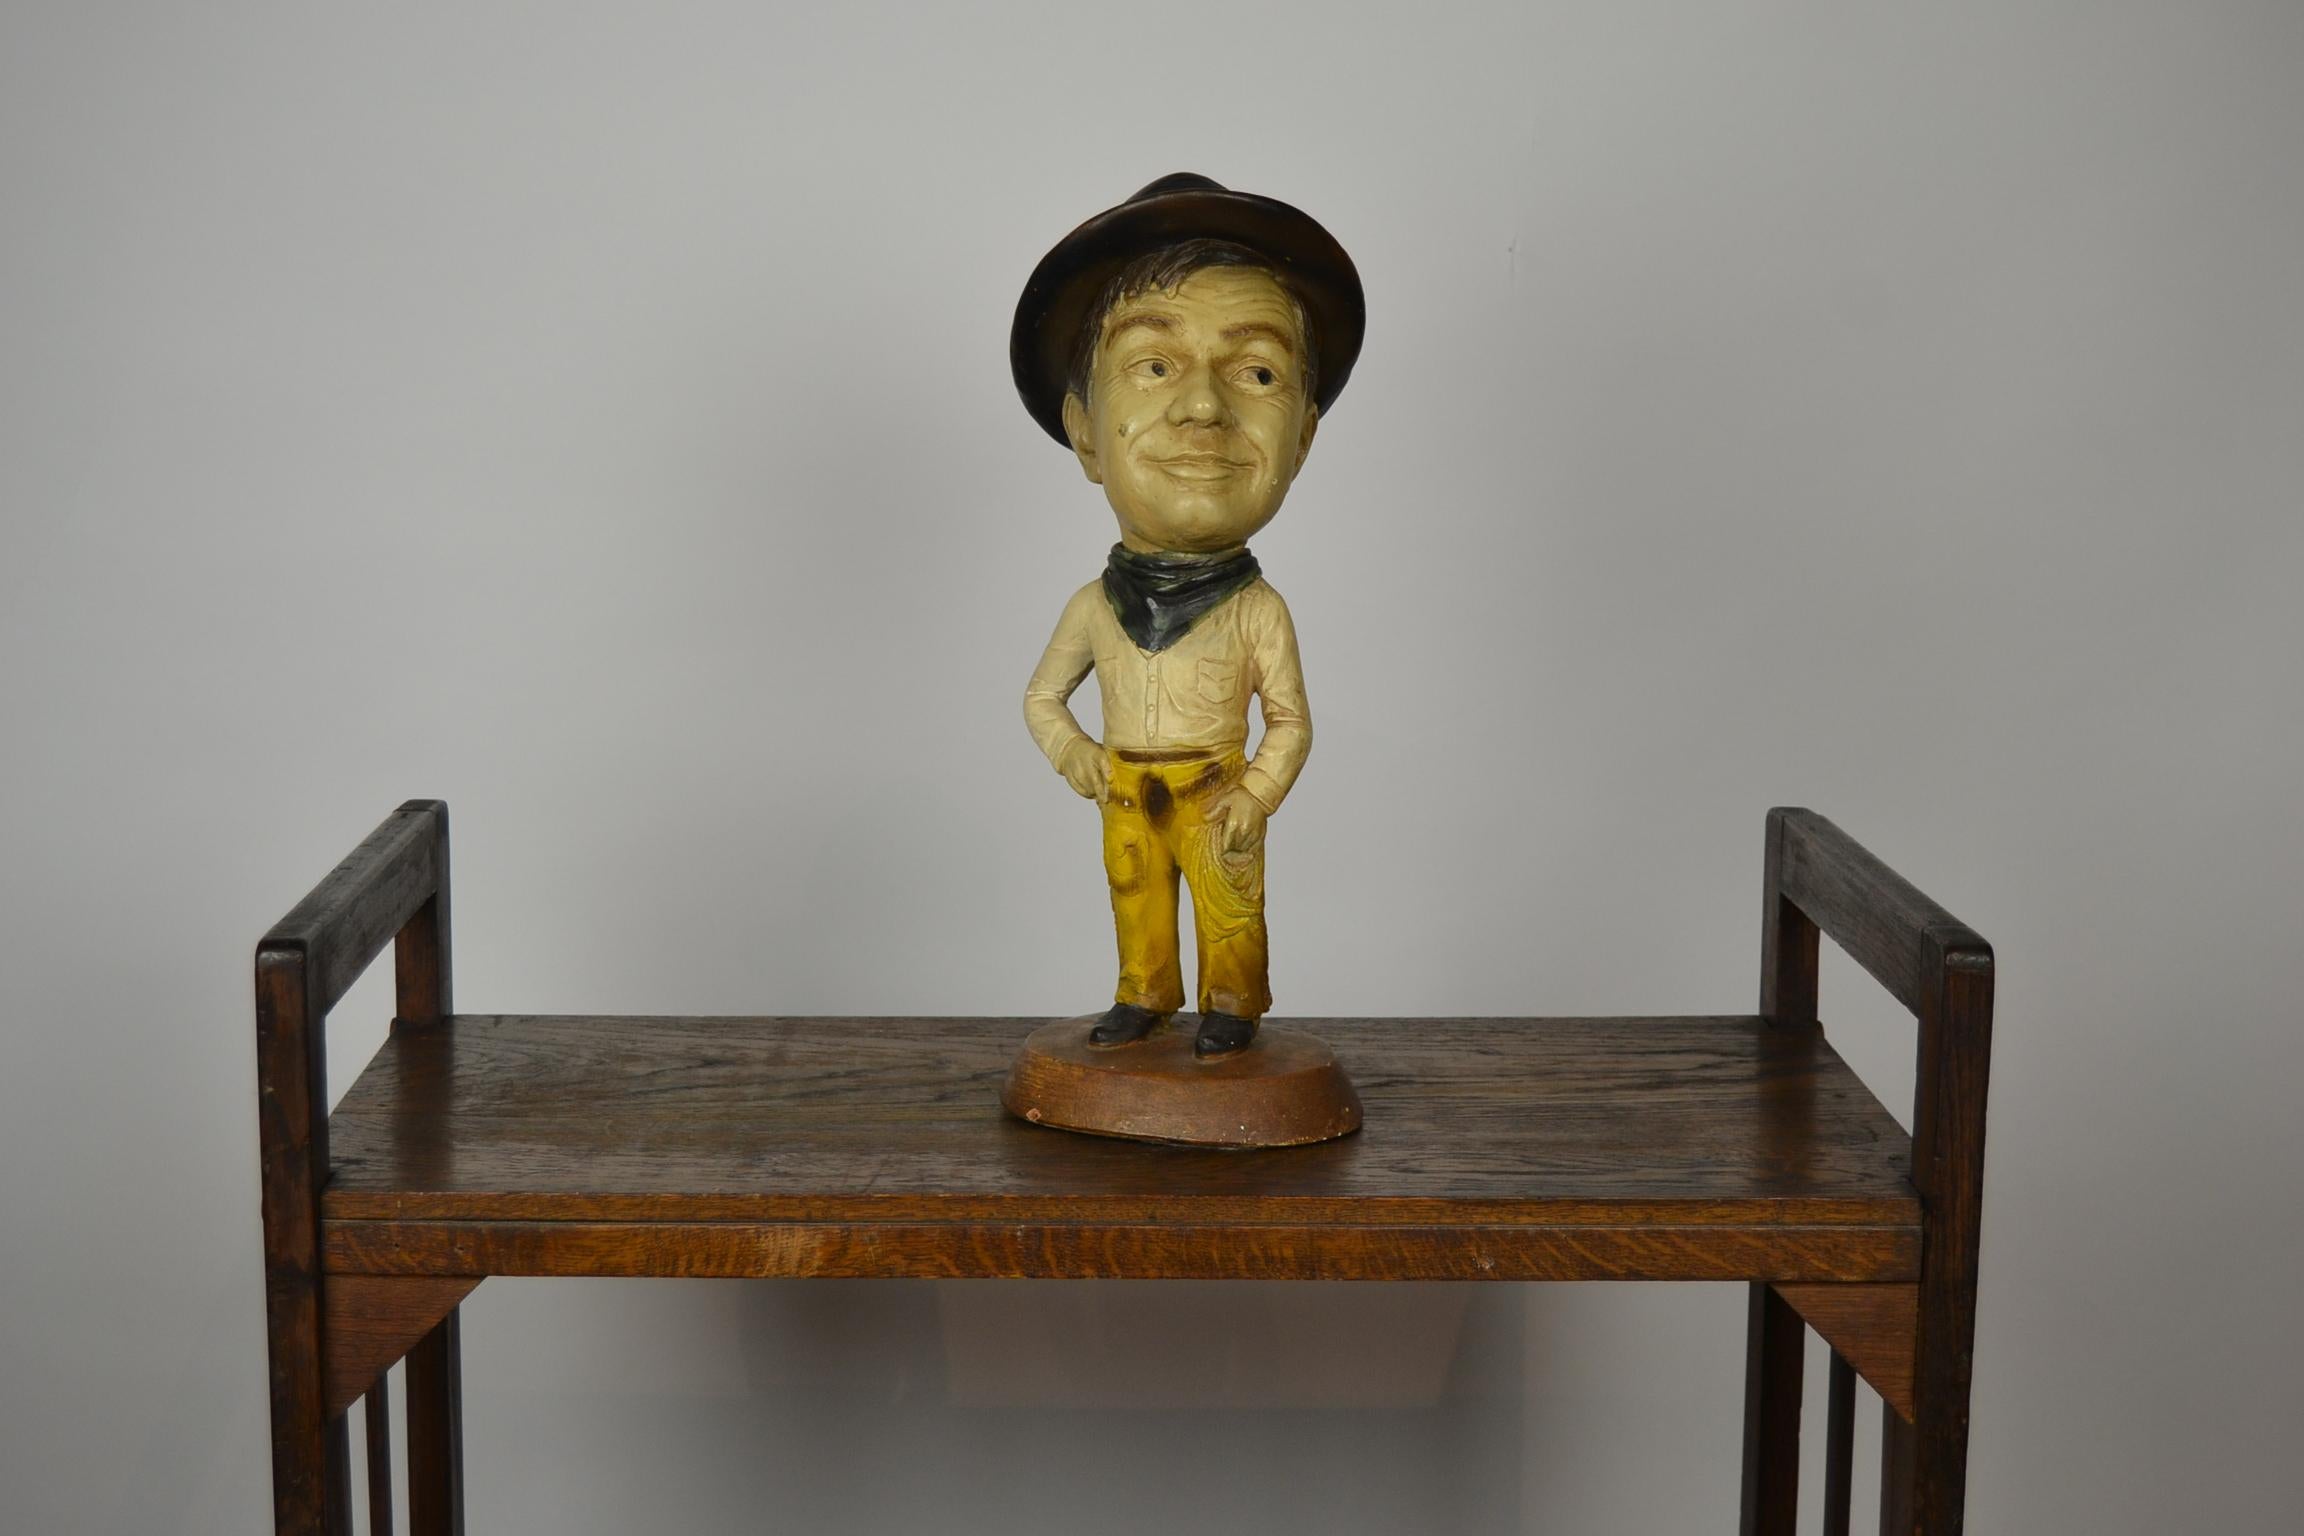 Vintage Esco statue of cowboy Will Rogers - Esco Prod. Inc. 1972.
This big - headed chalkware statue was made by Esco, 
the Entertainment Statue Company,
which is known for the big headed unauthorized caricature statuettes of famous people.
This